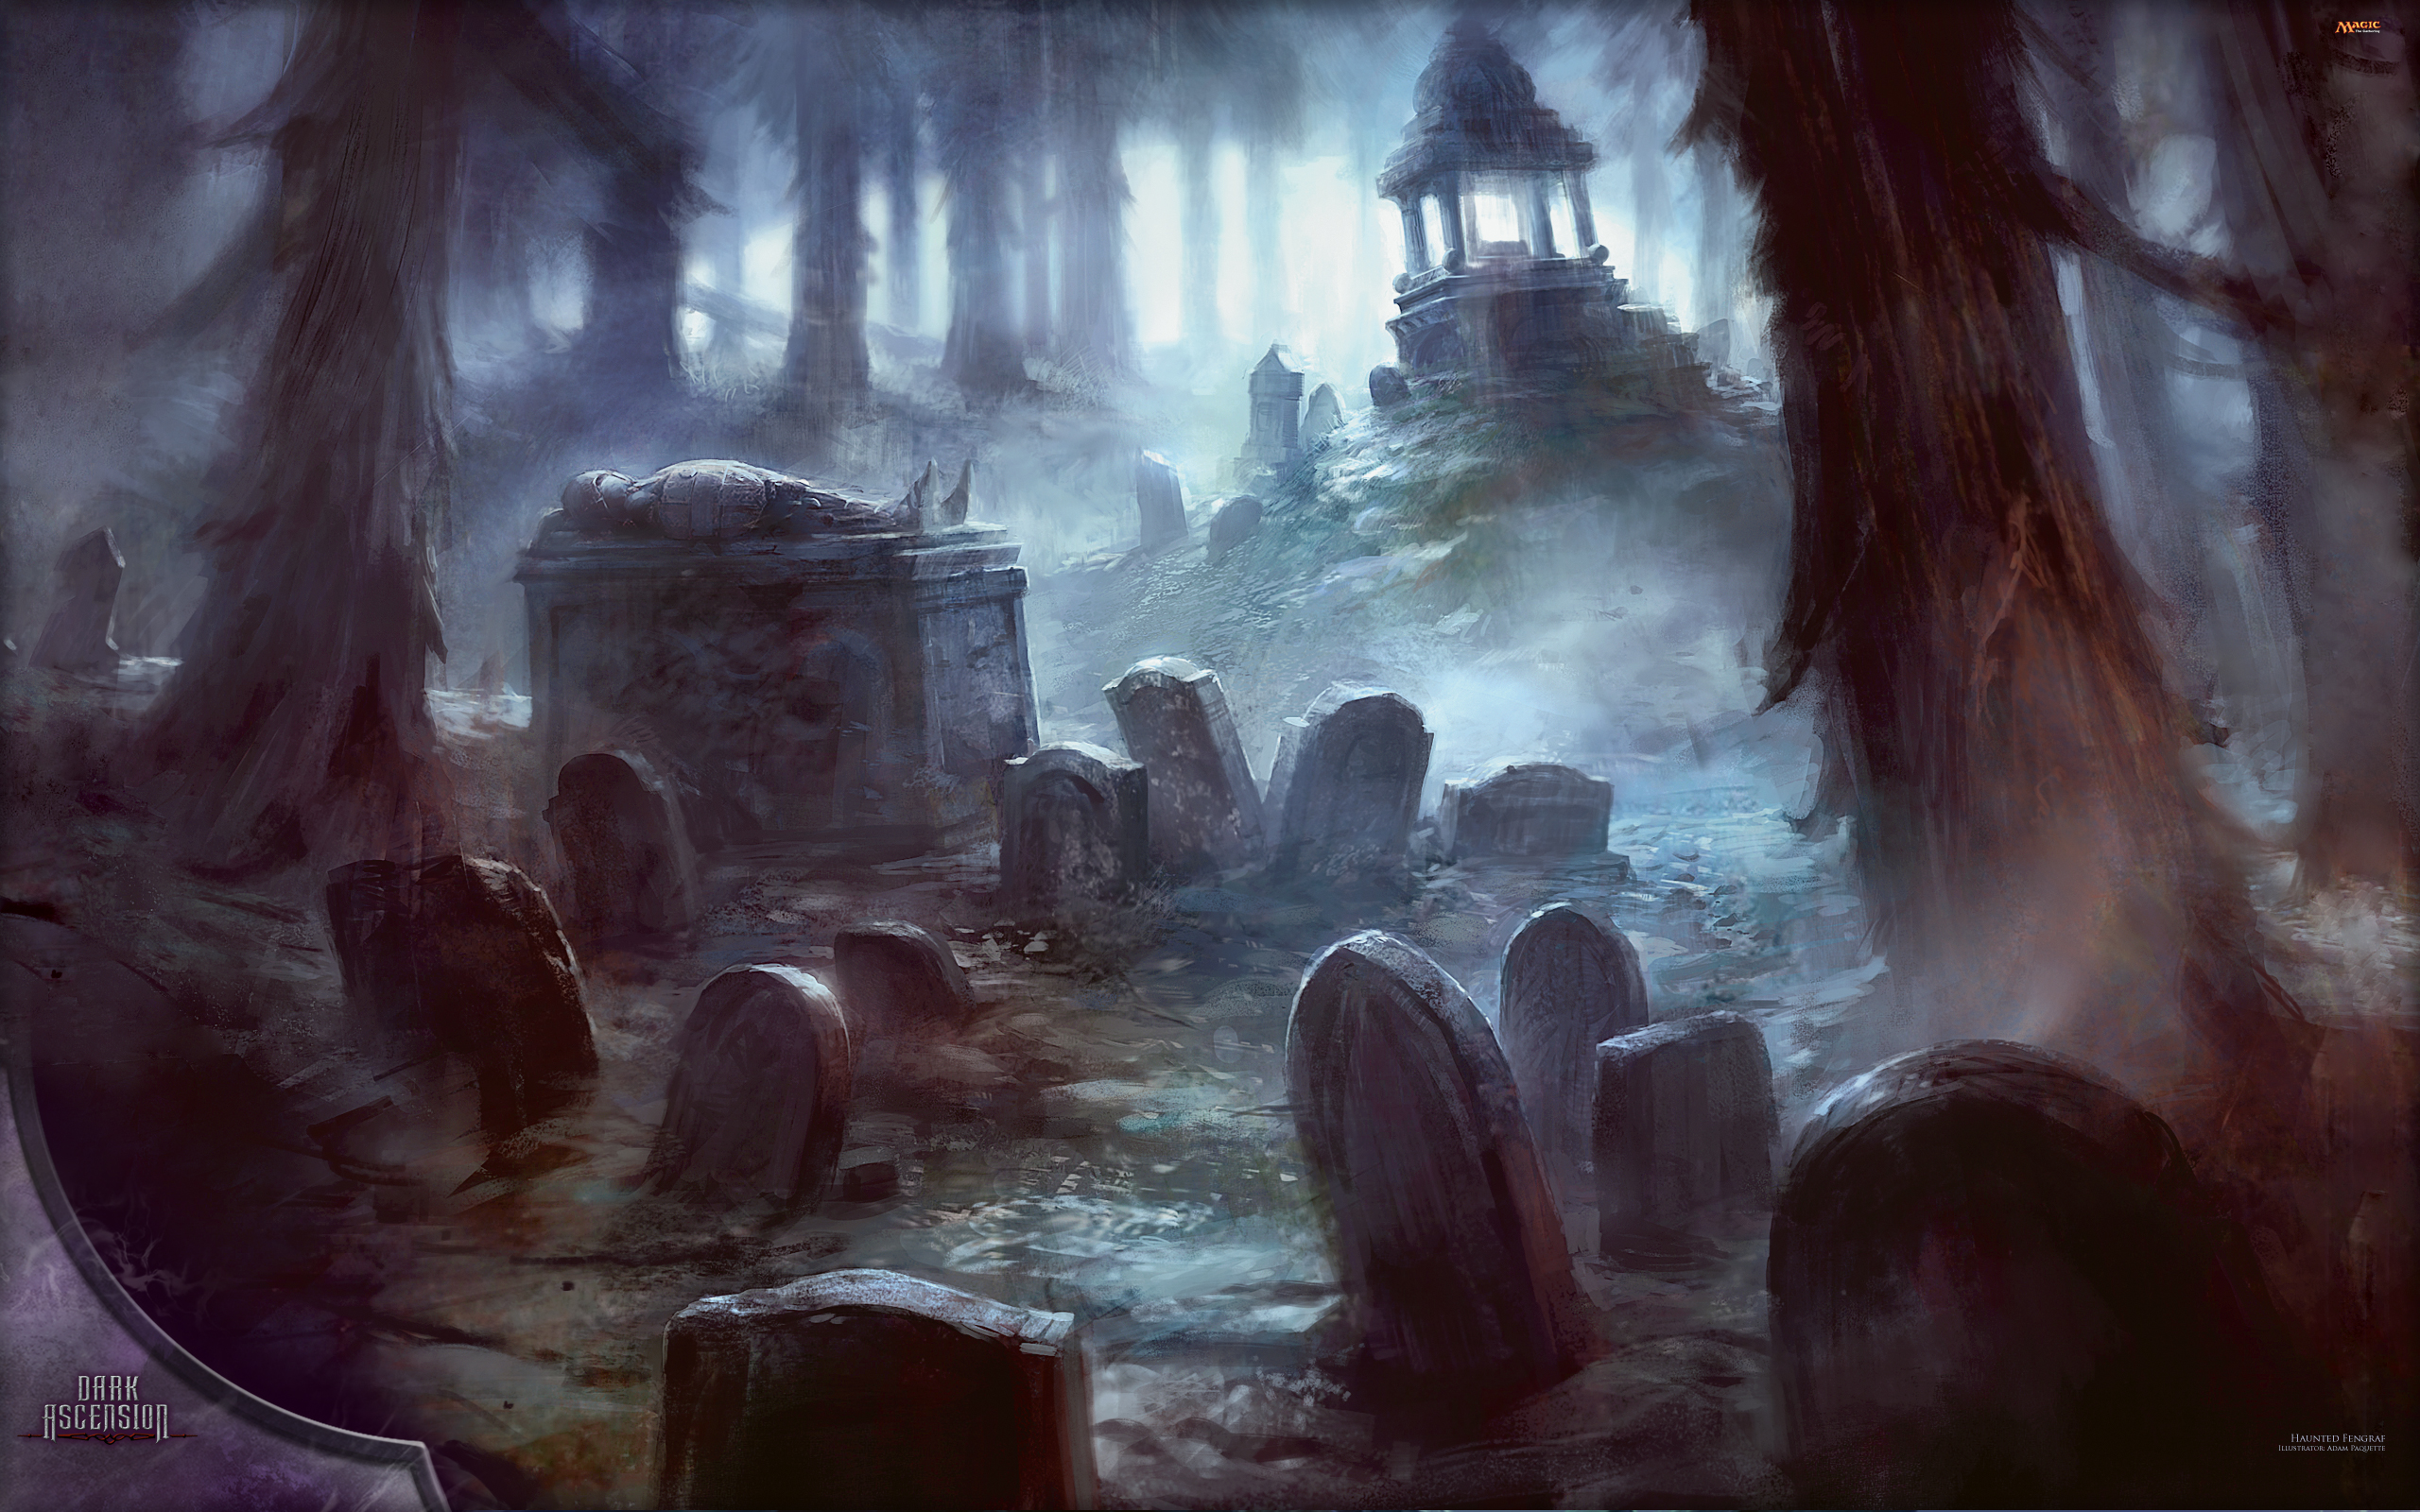 New Scary WallPapers - 35 Dark Horror HD Backgrounds - The Art